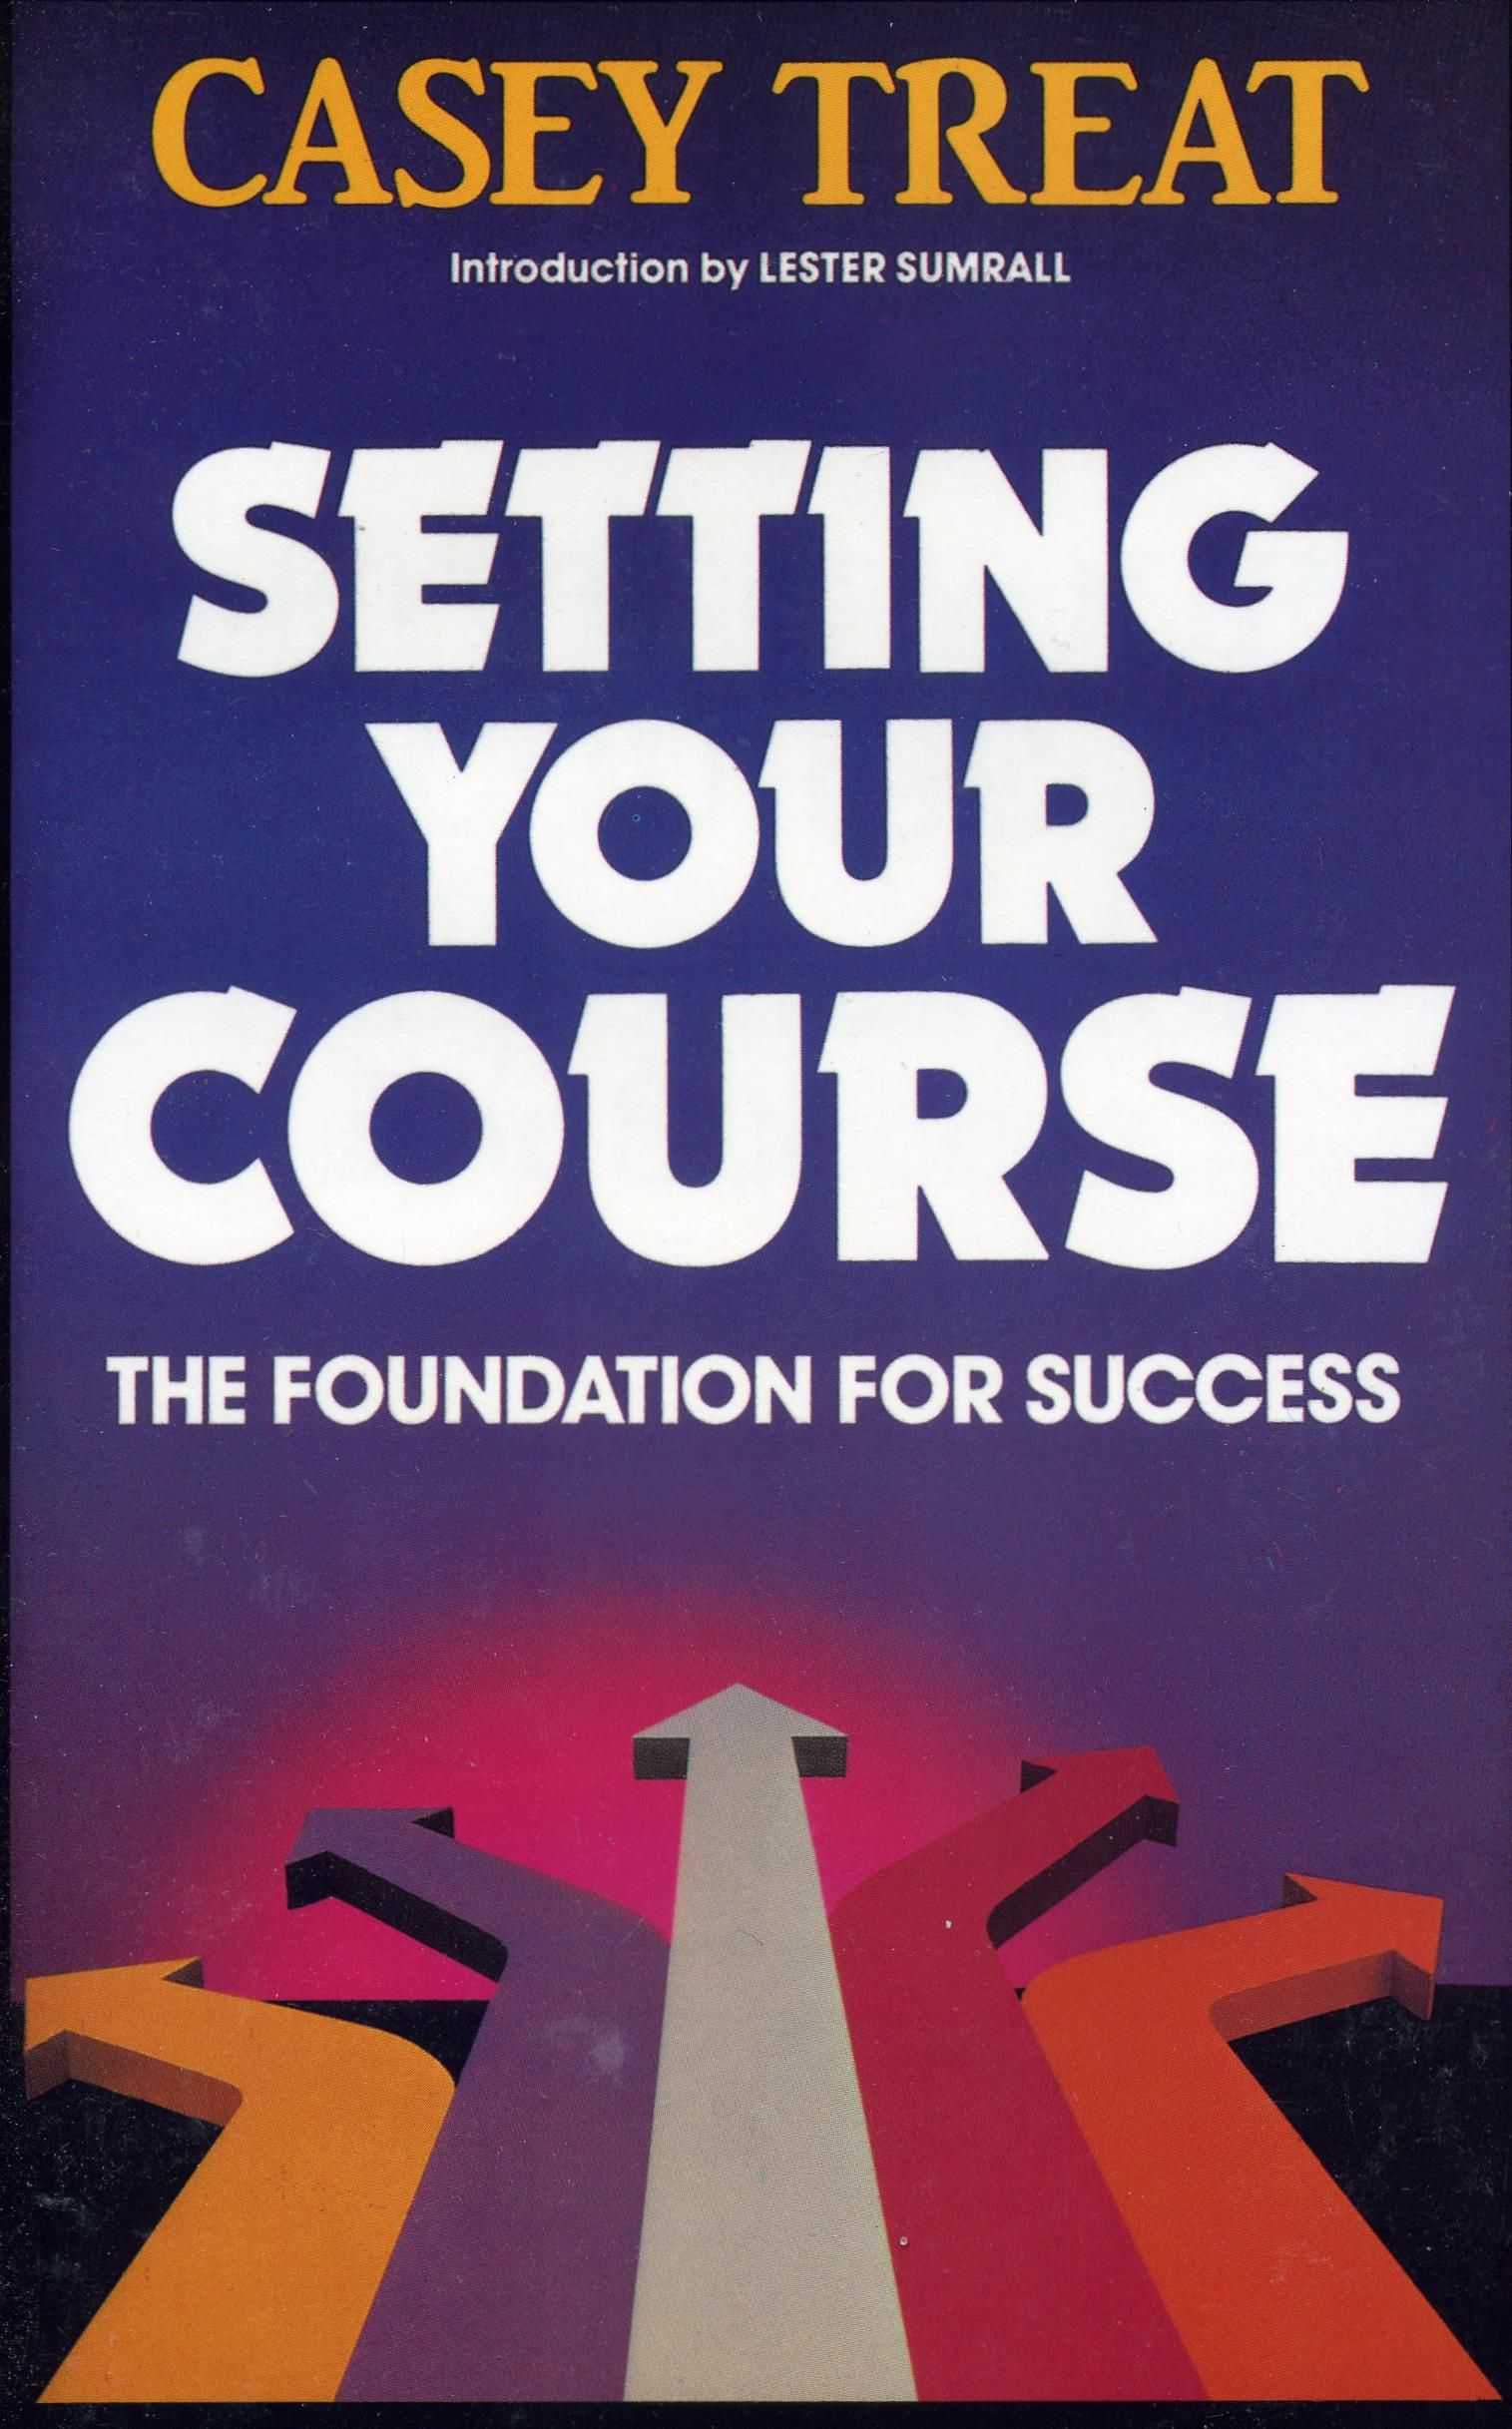 Englische Bücher - C. Treat: Setting your Course - The Foundation